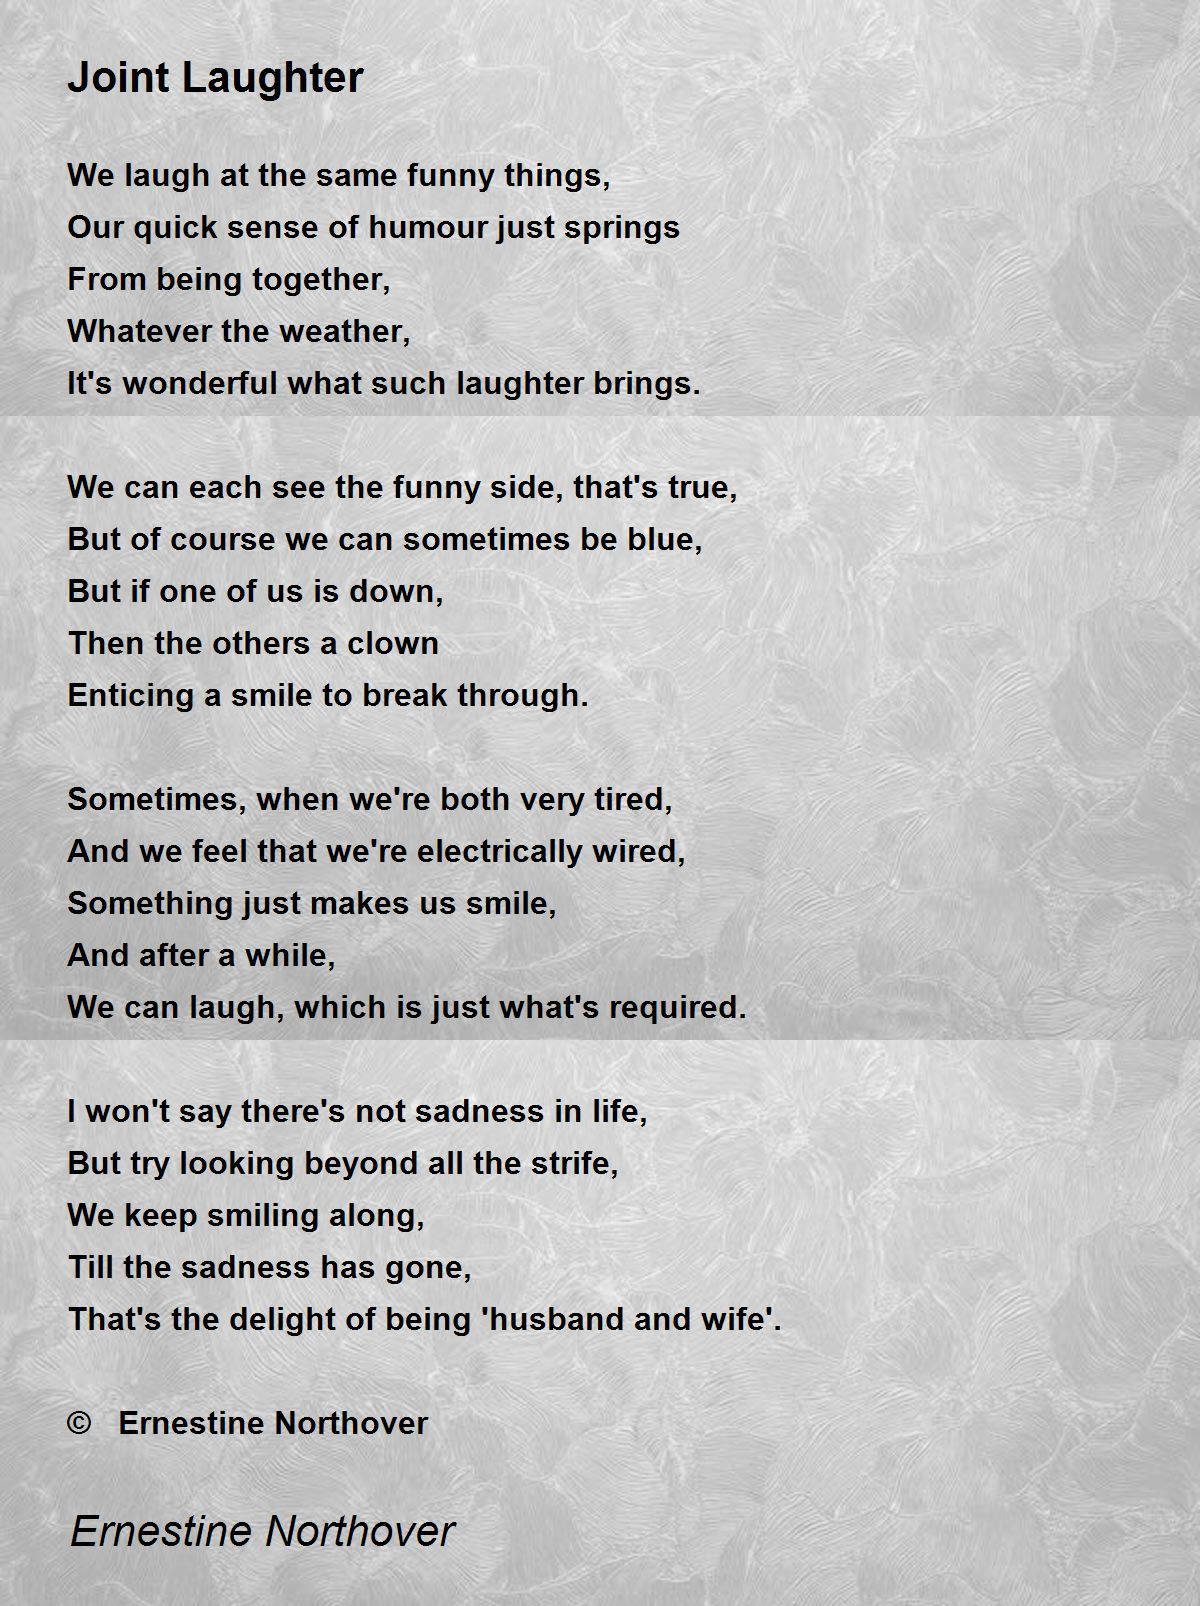 Joint Laughter - Joint Laughter Poem by Ernestine Northover